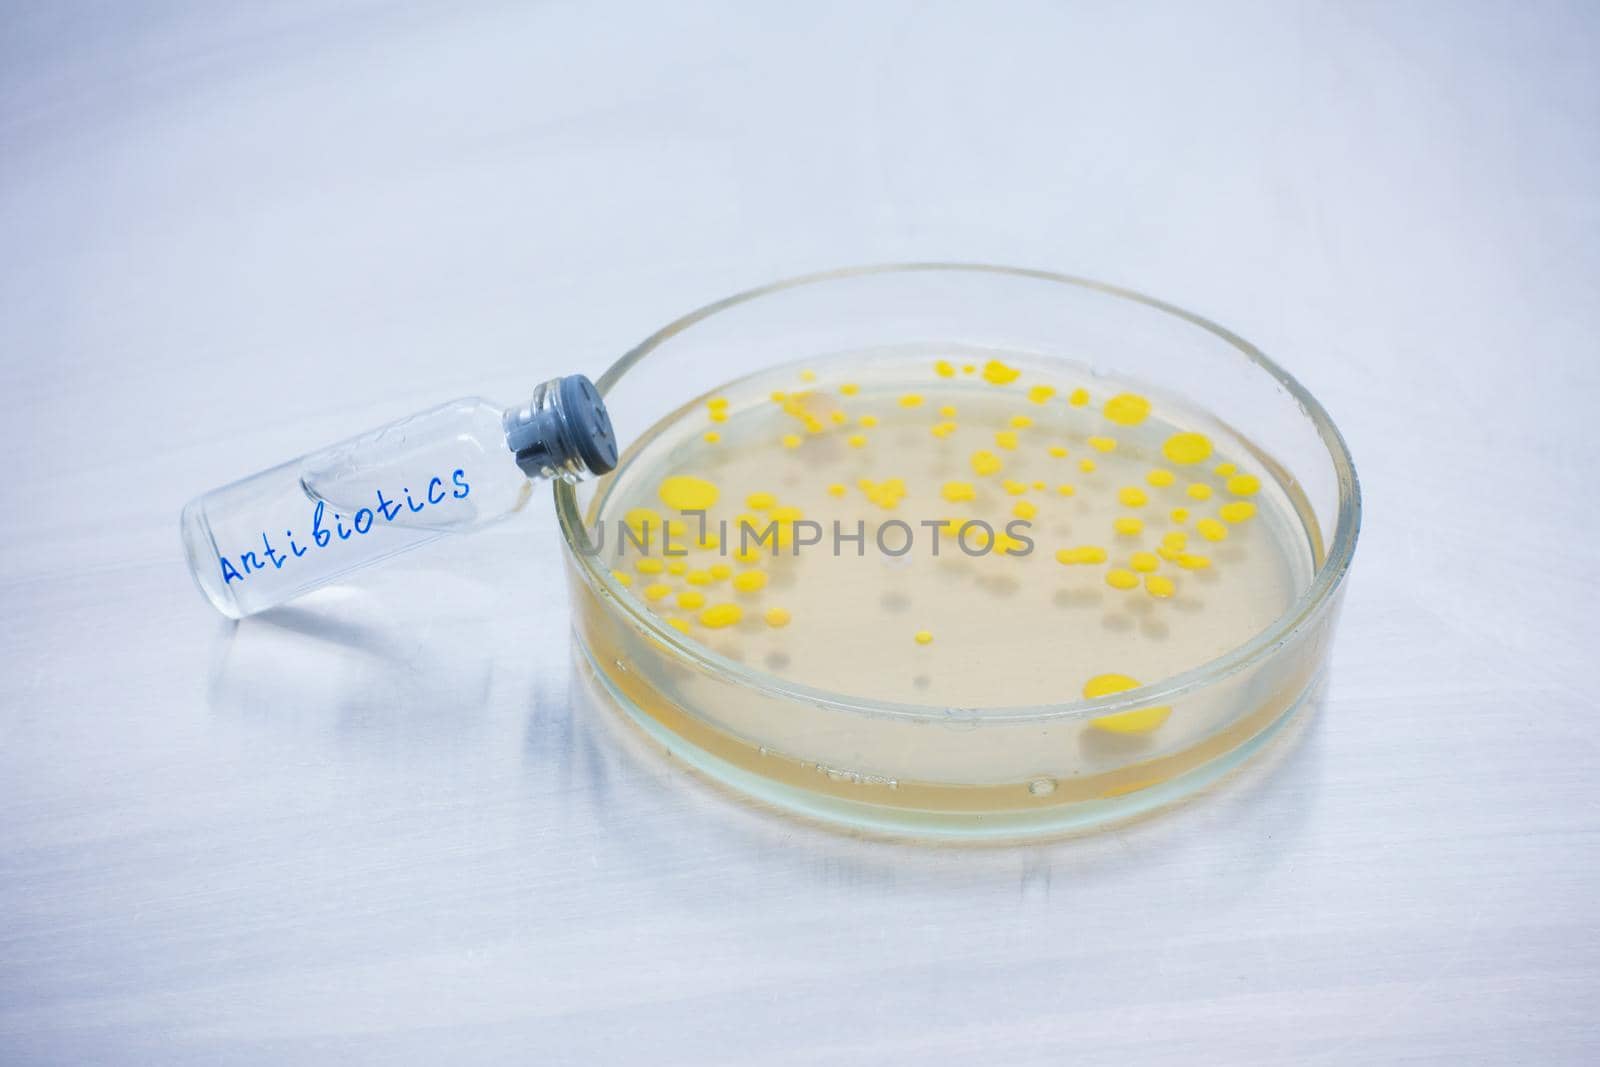 Bacteria in Petri Dish with Antibiotics. by Jannetta